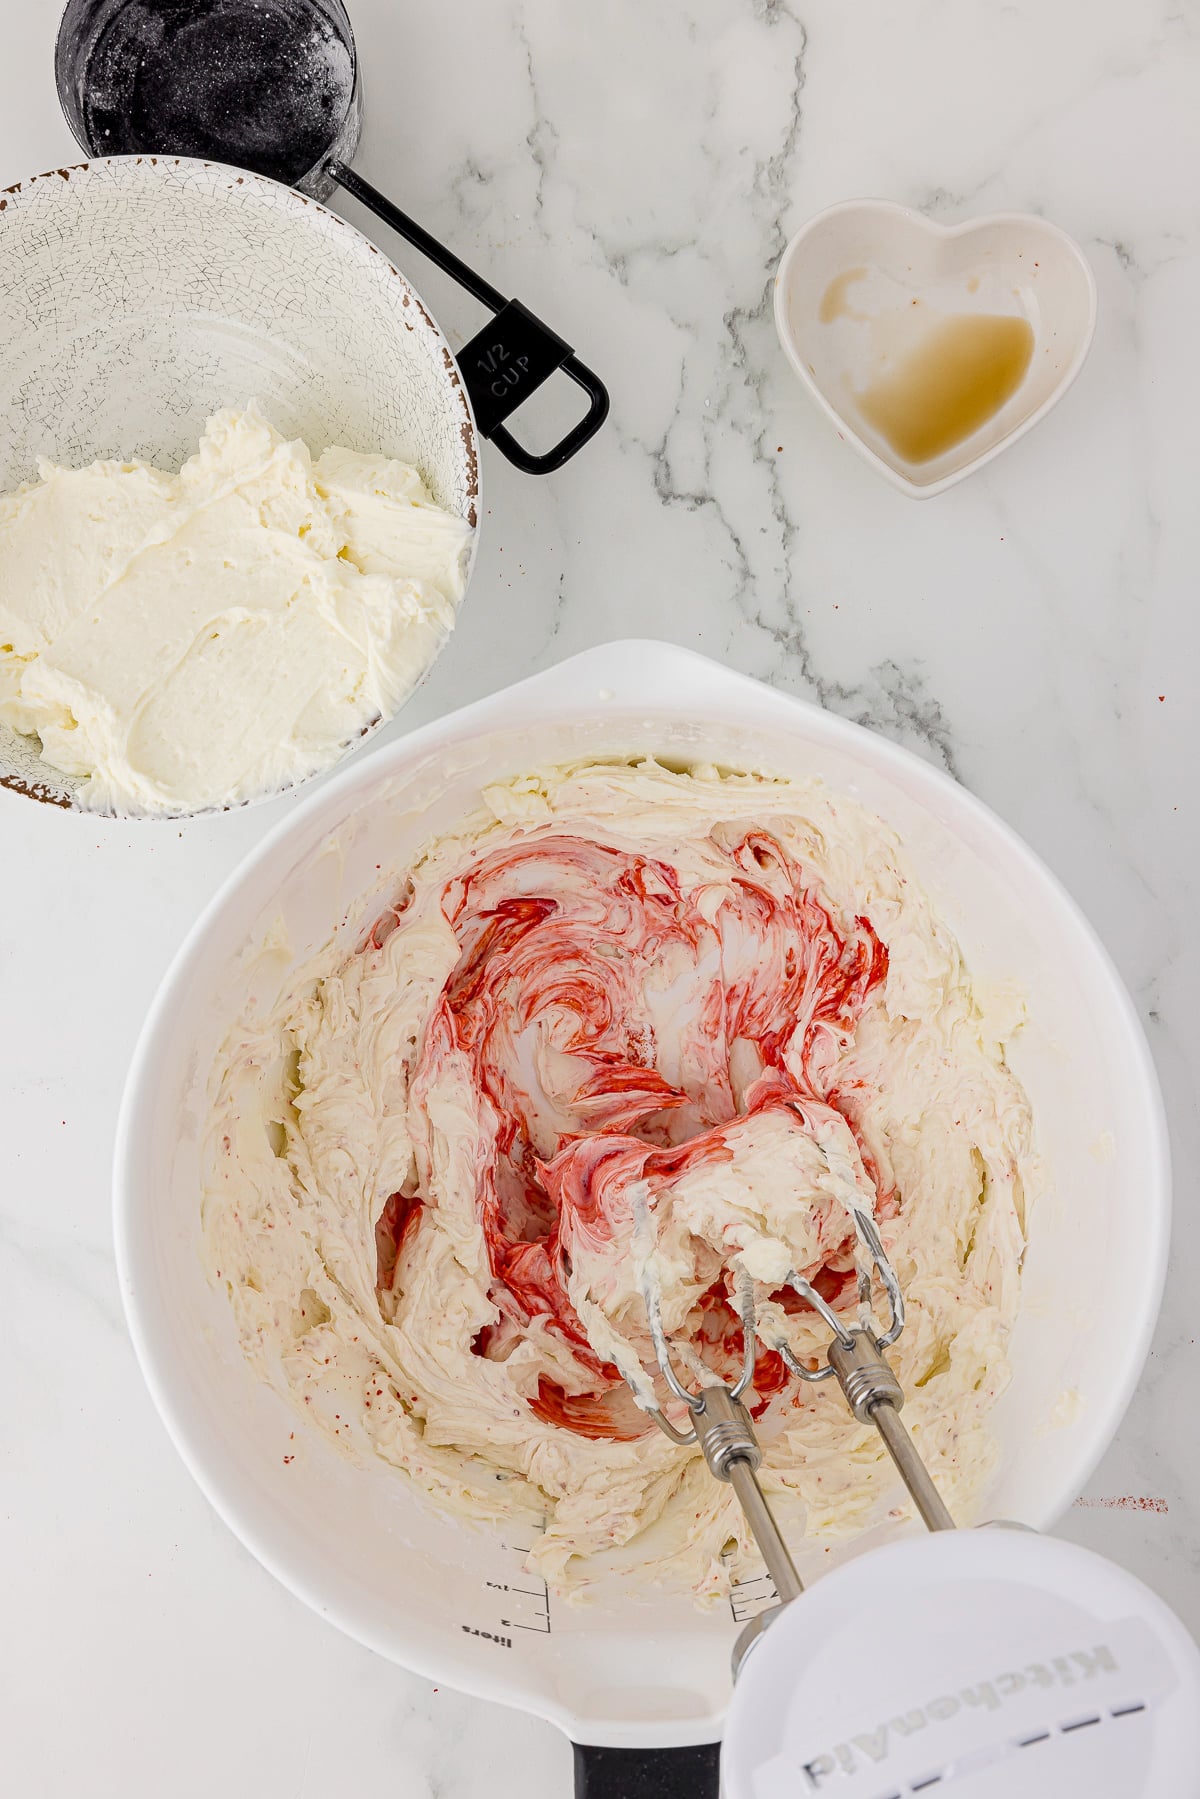 cream cheese mixture with freeze dried strawberries being mixed in a white batter bowl with a hand held mixer